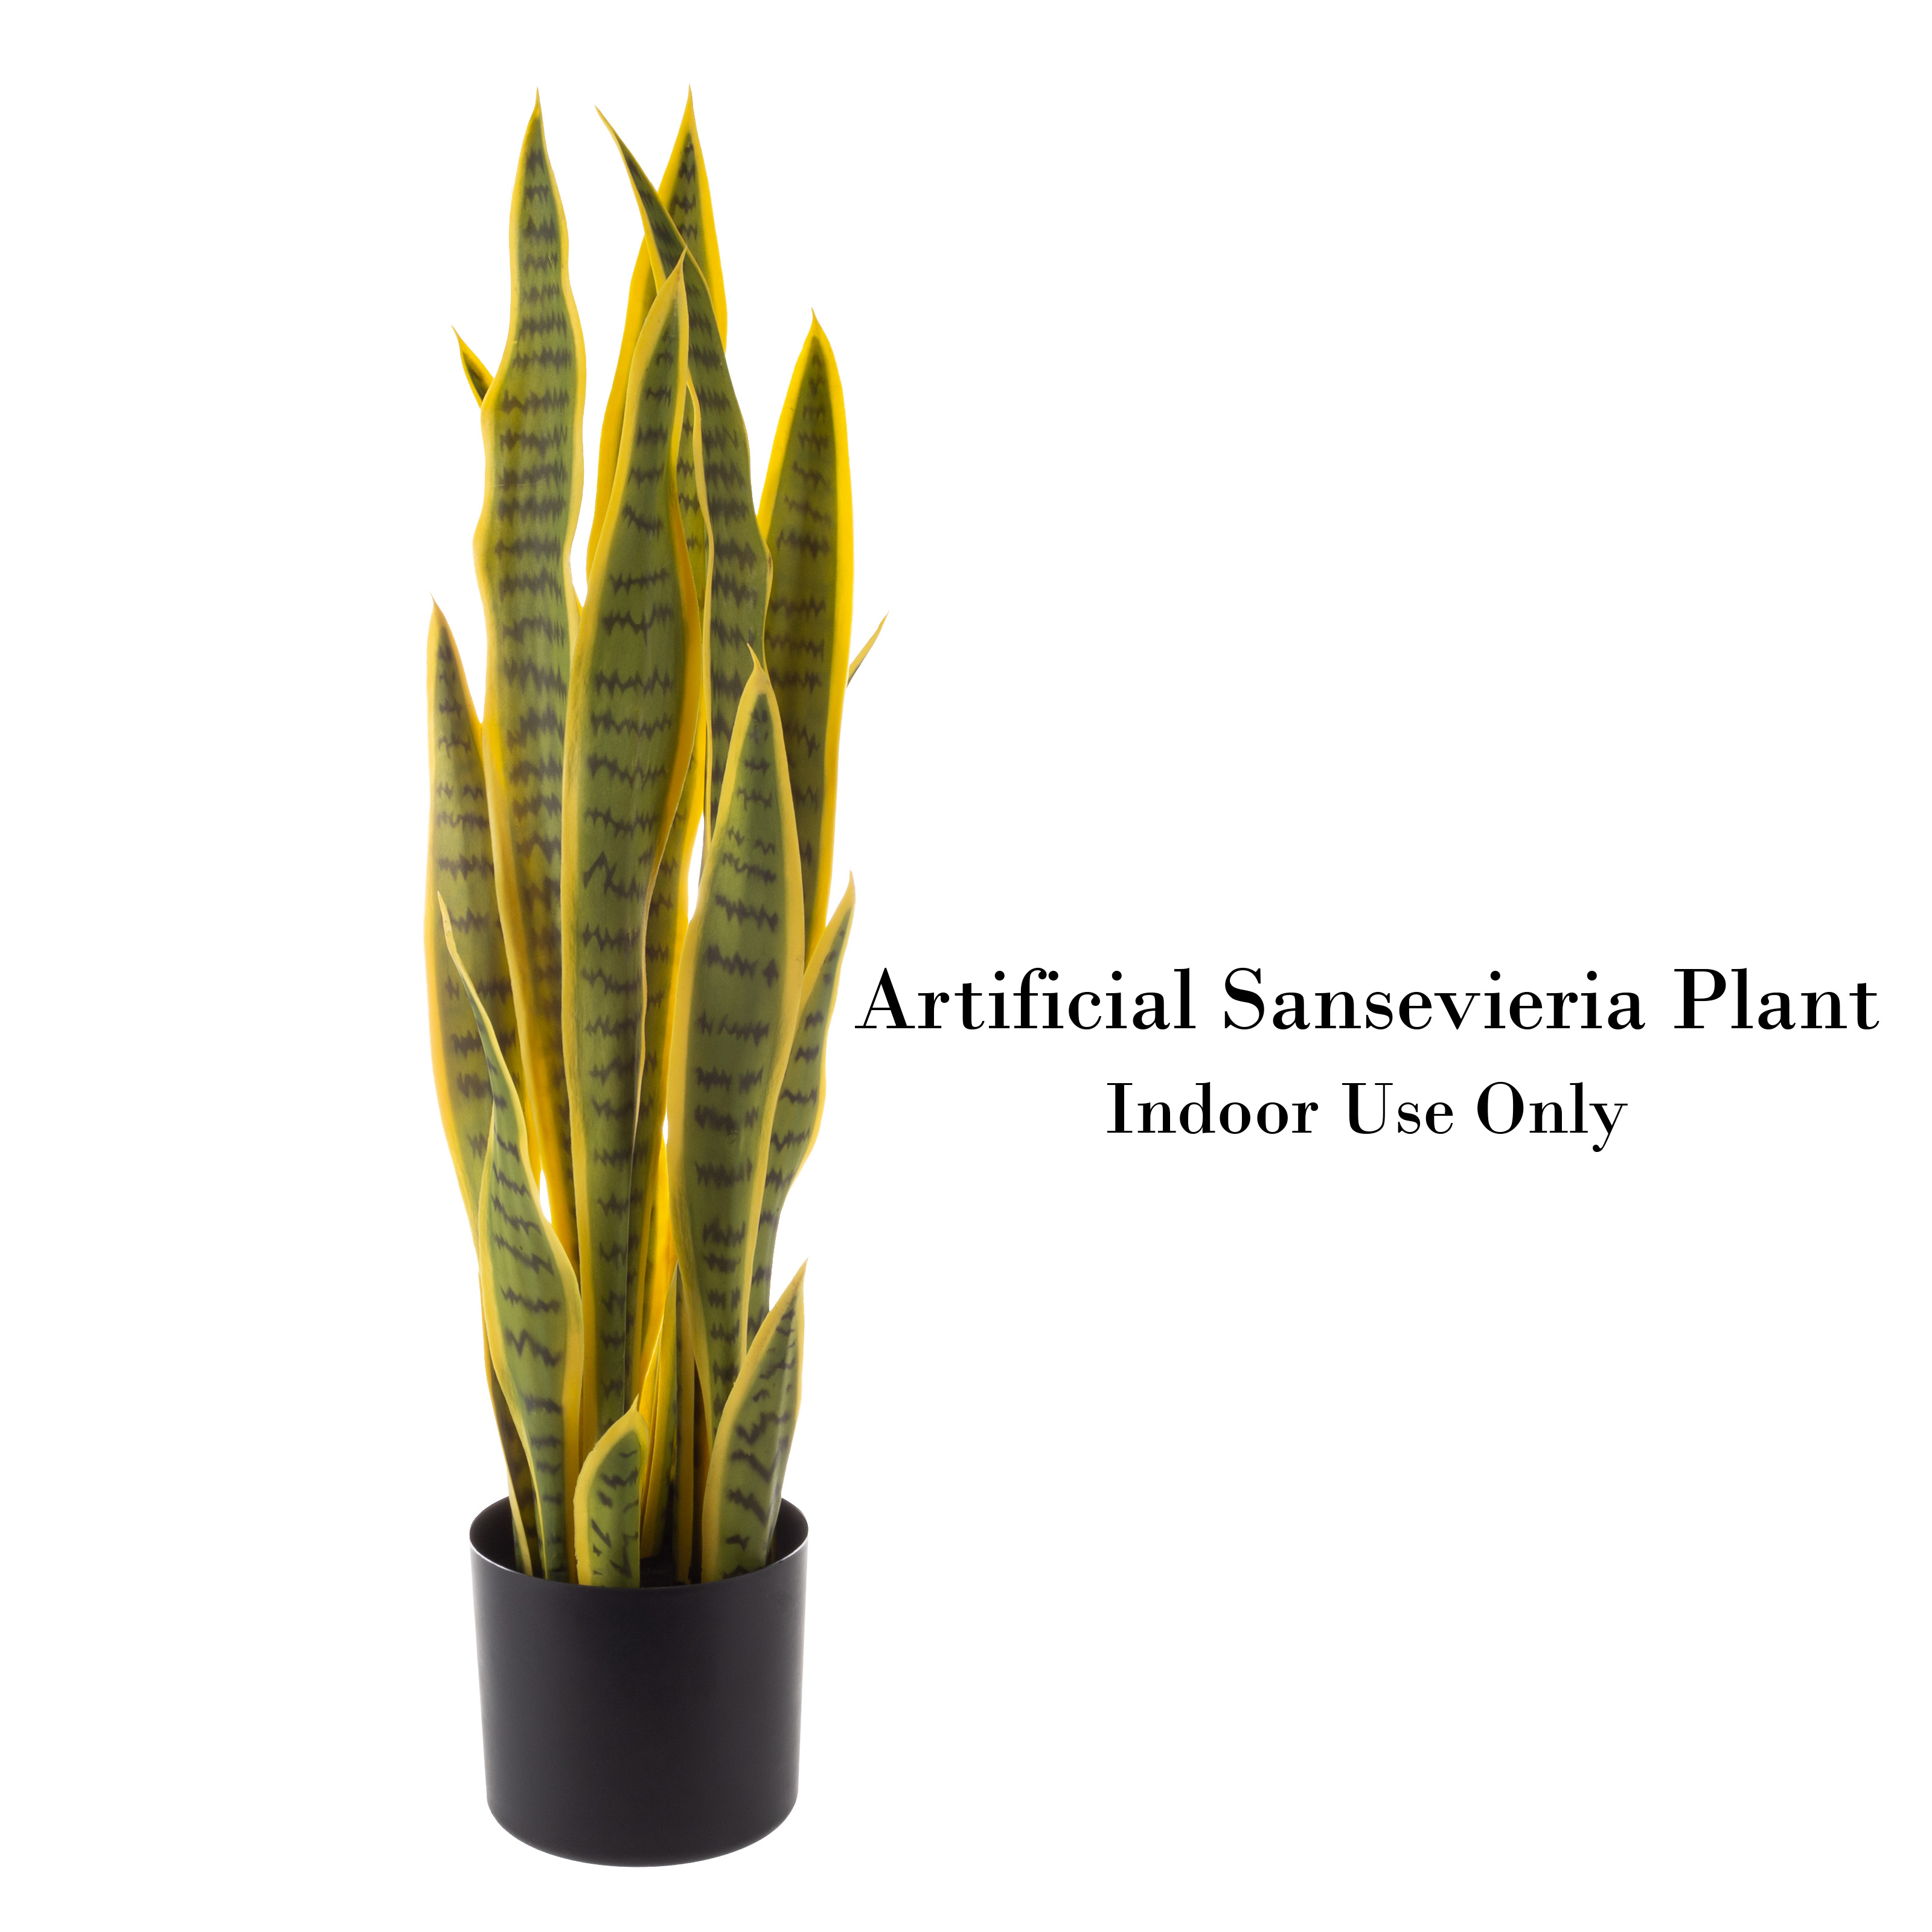 Pure Garden 29.5-inch Potted Sansevieria Snake Artificial Plant